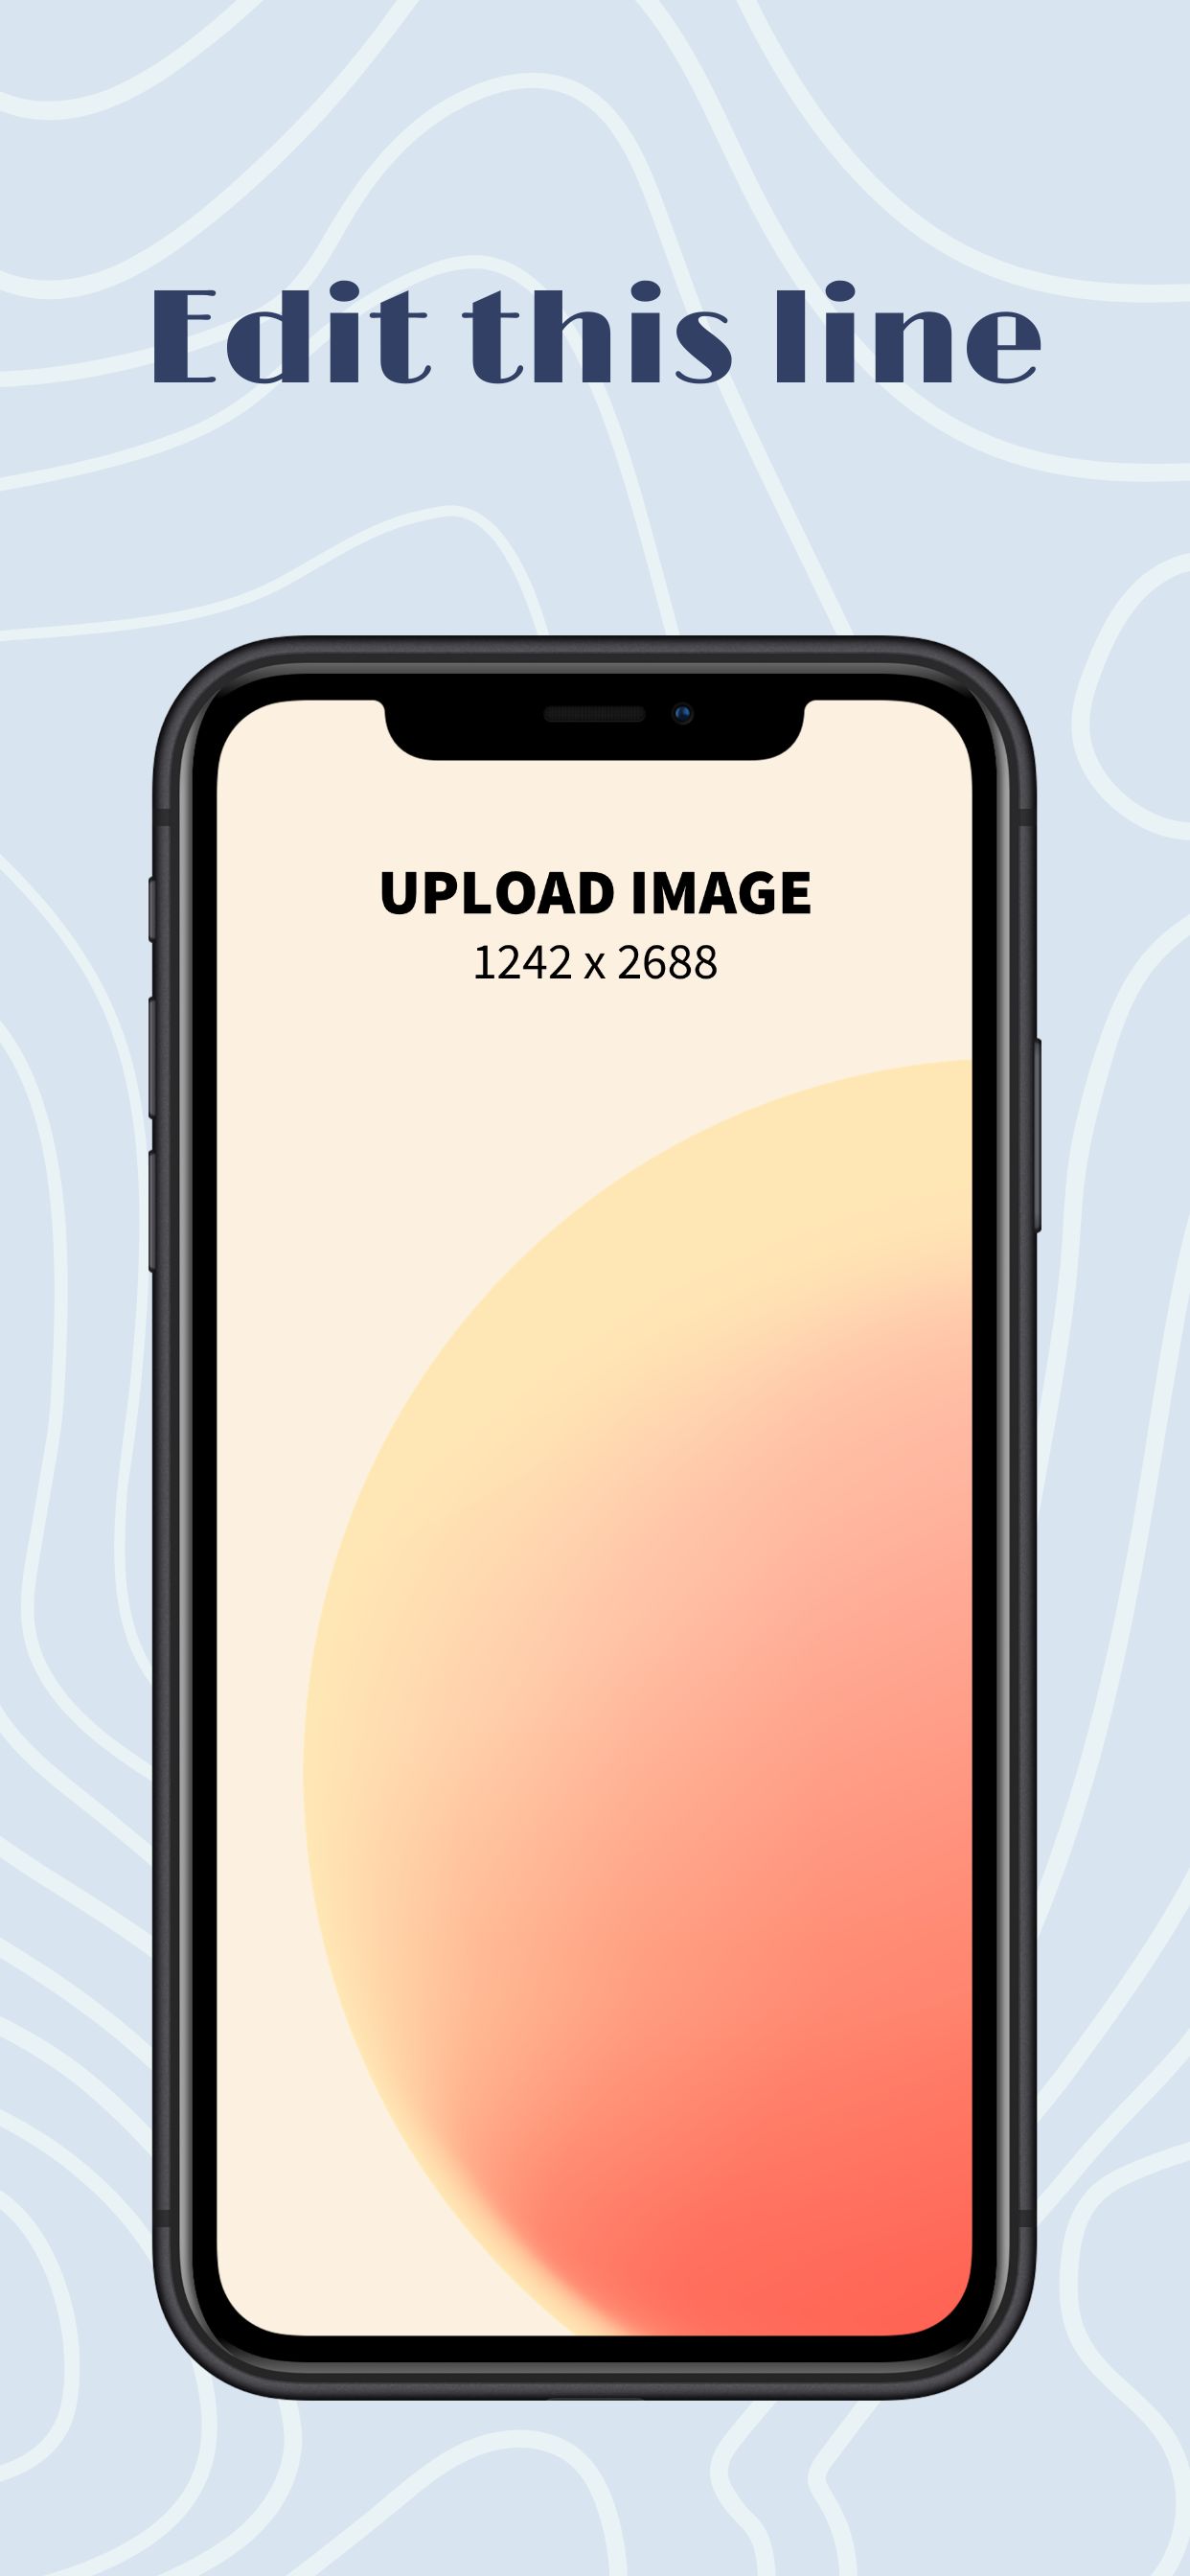 iPhone XS Max Screenshot 7 template. Quickly edit fonts, text, colors, and more for free.